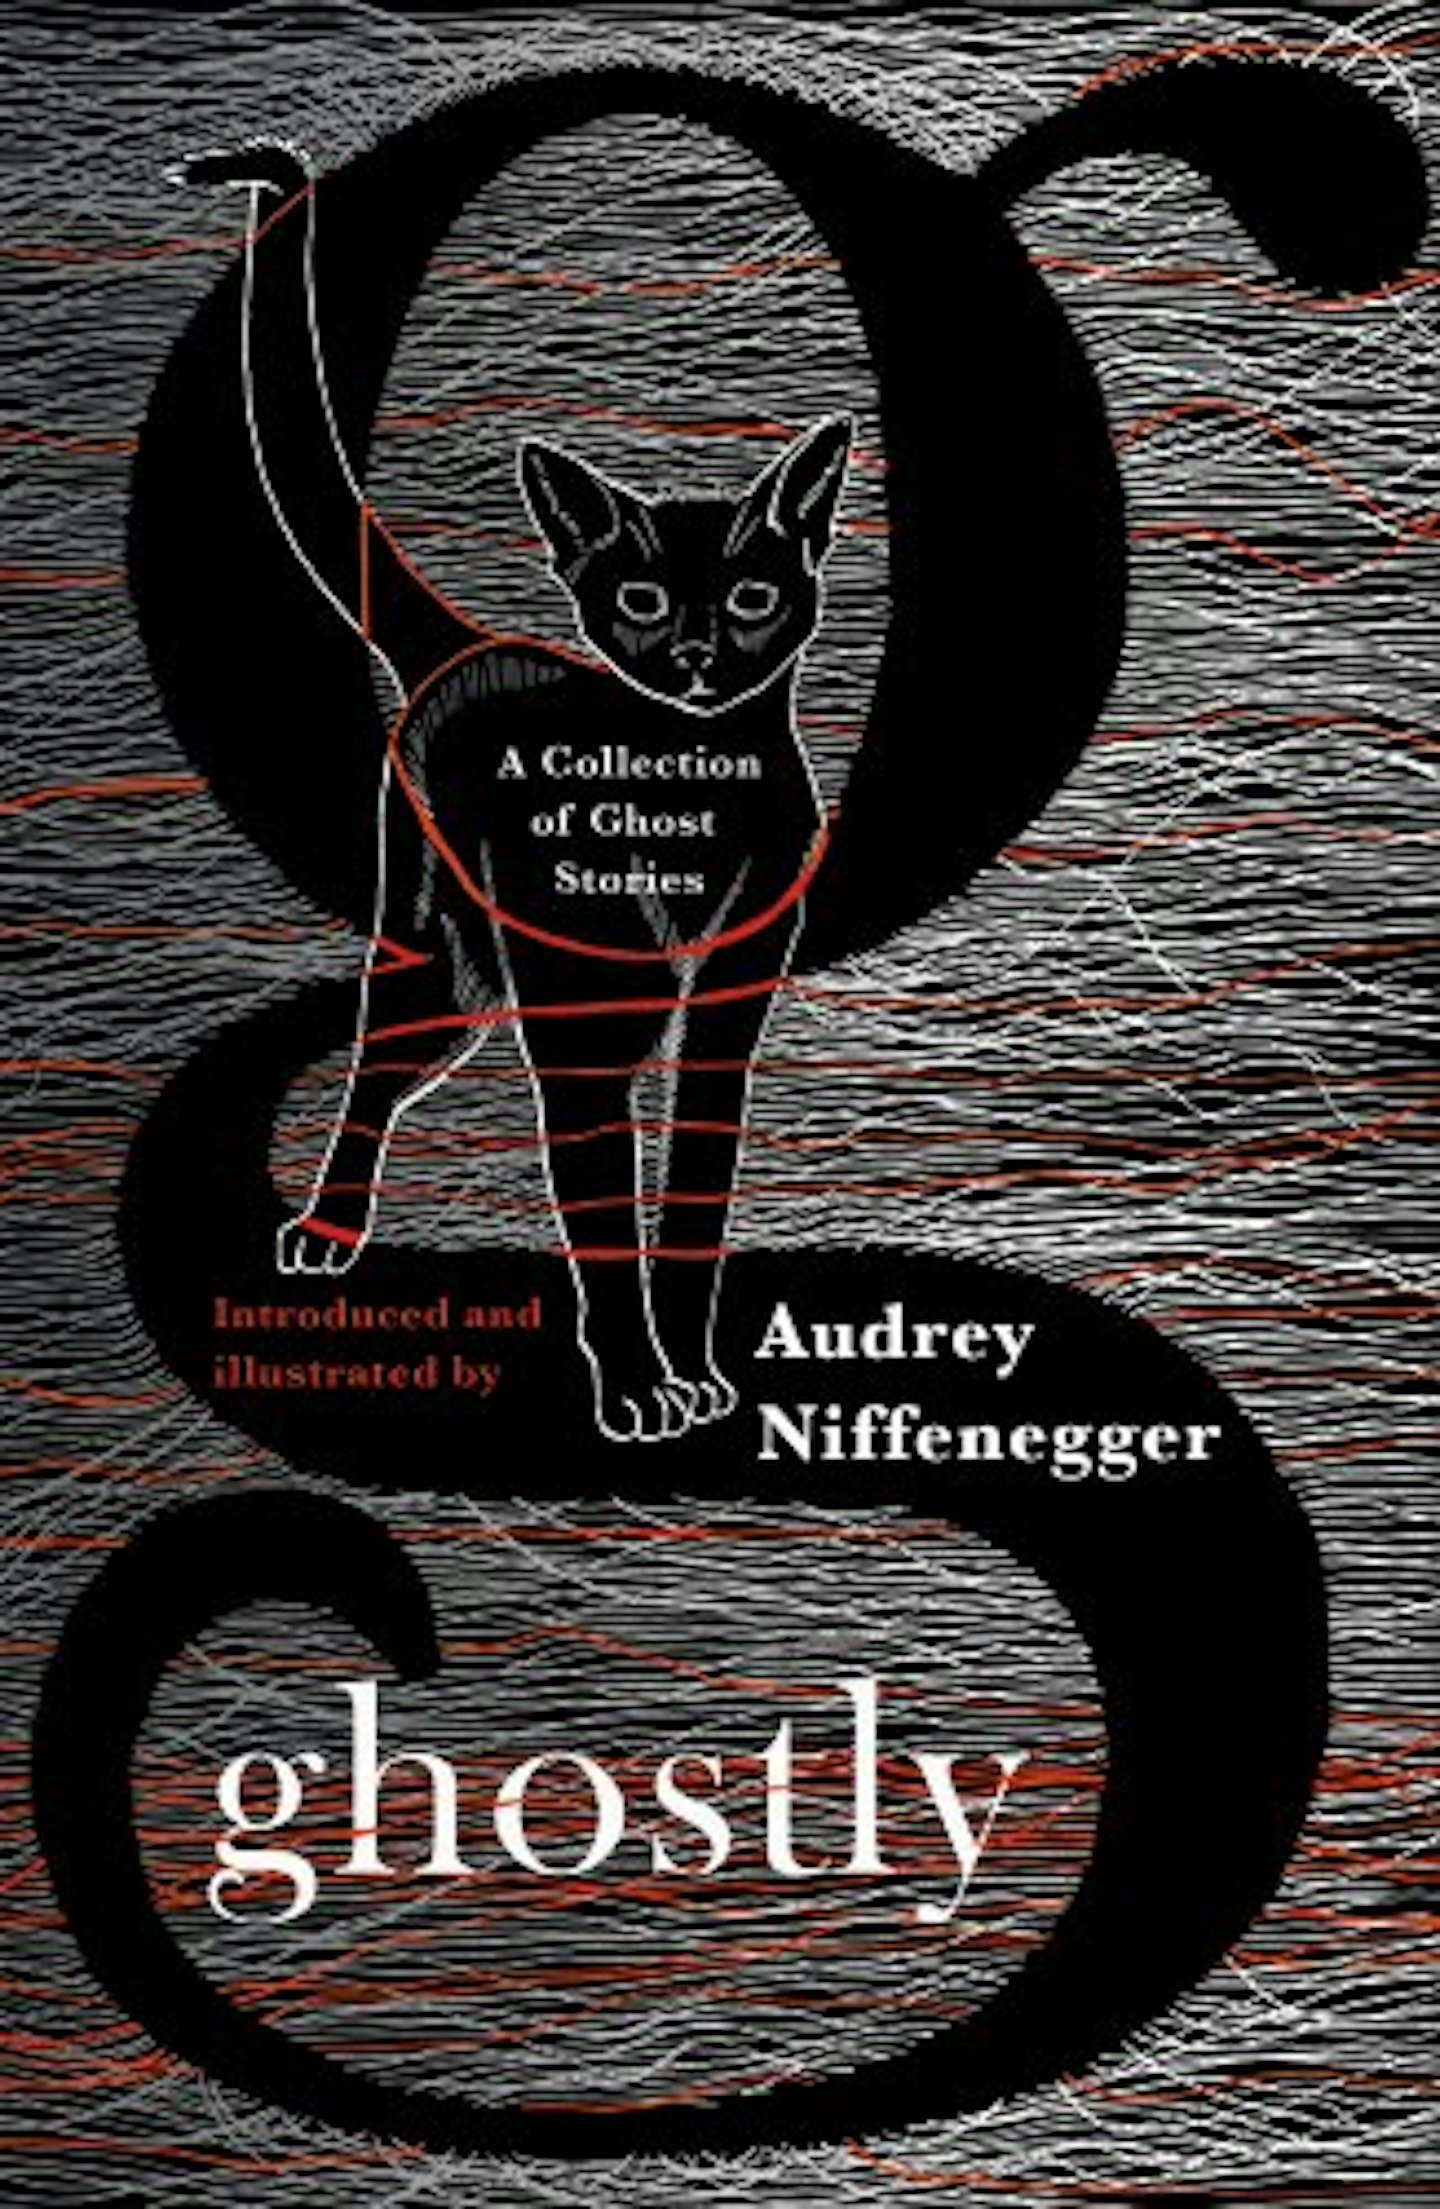 Ghostly: A collection of Ghost Stories - Edited & illustrated by Audrey Niffenegger (Vintage)